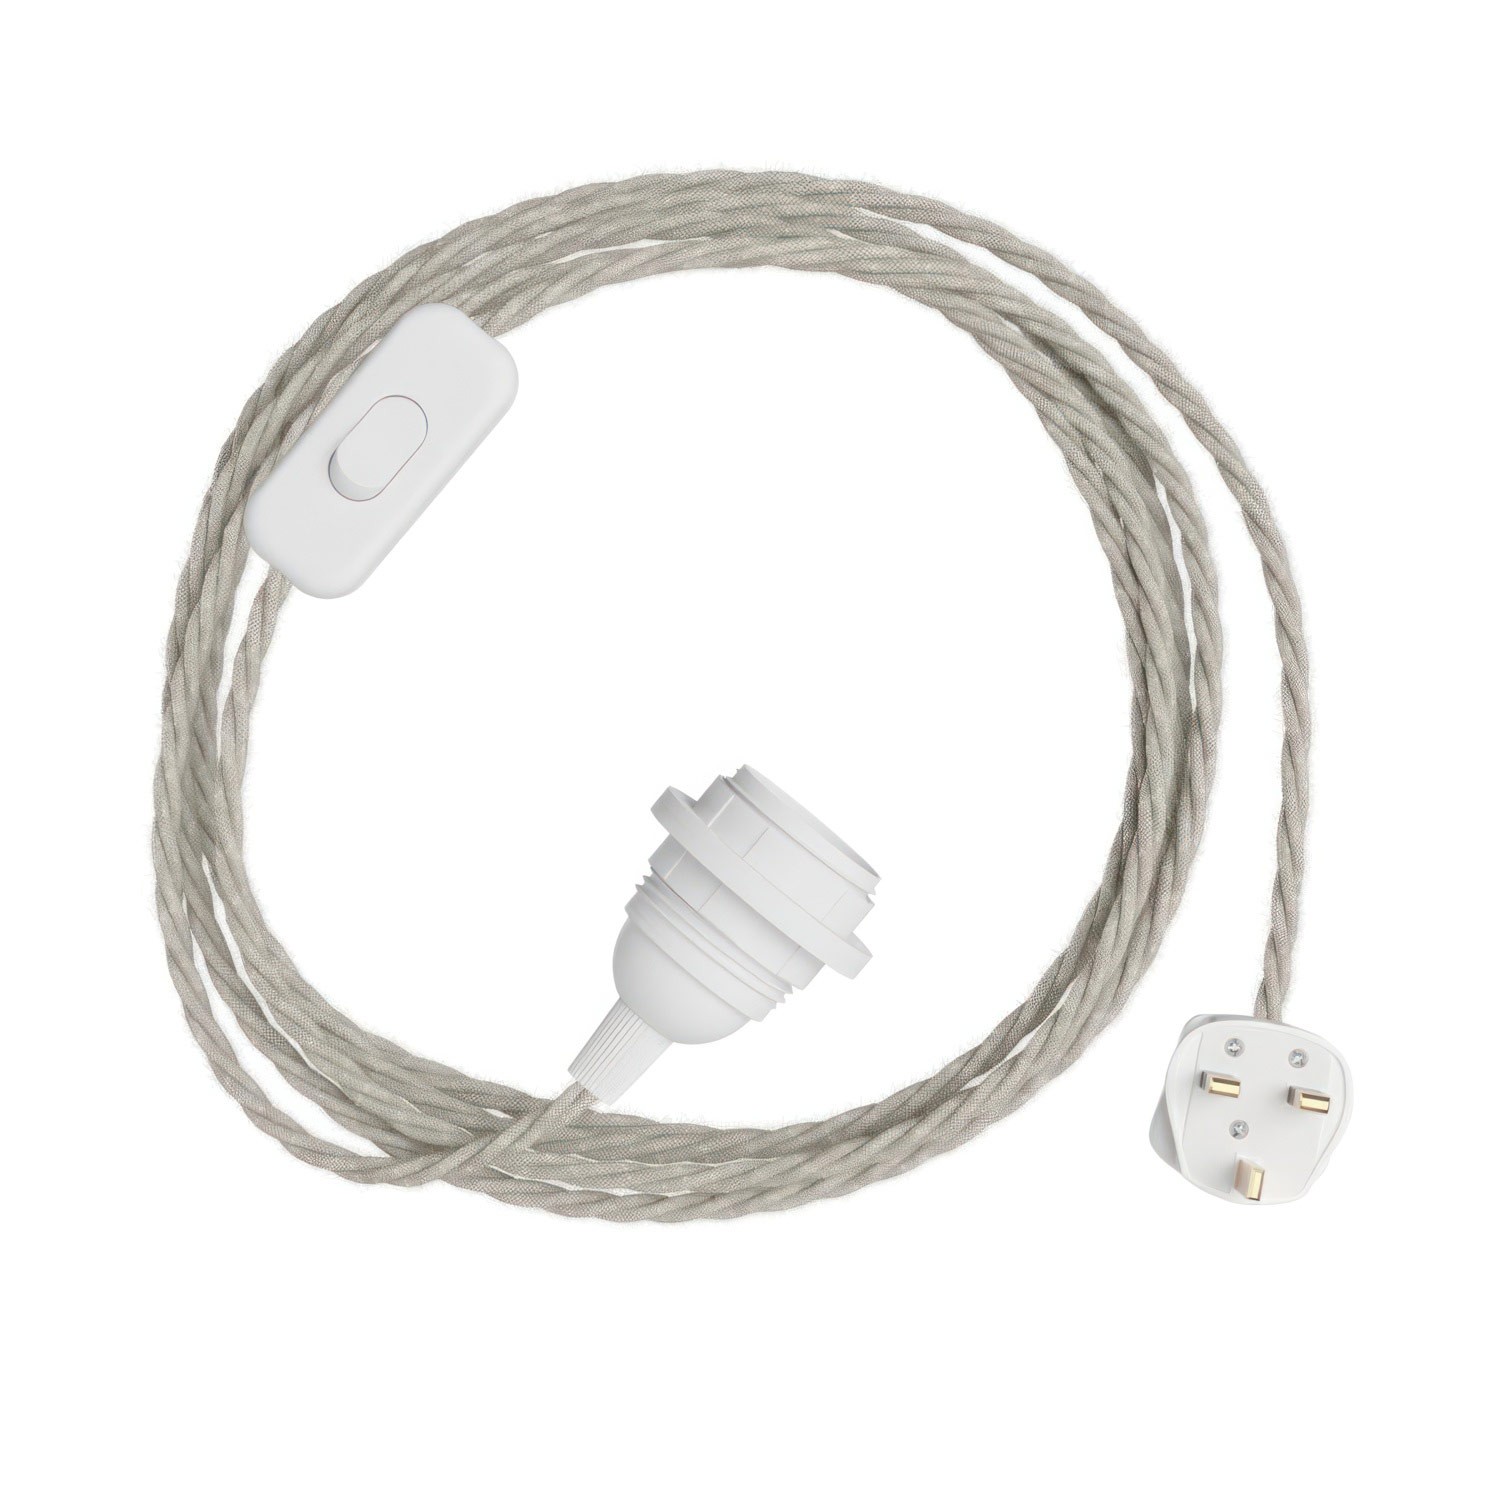 SnakeBis Twisted for lampshade - Wiring with lamp holder and twisted textile cable and UK plug